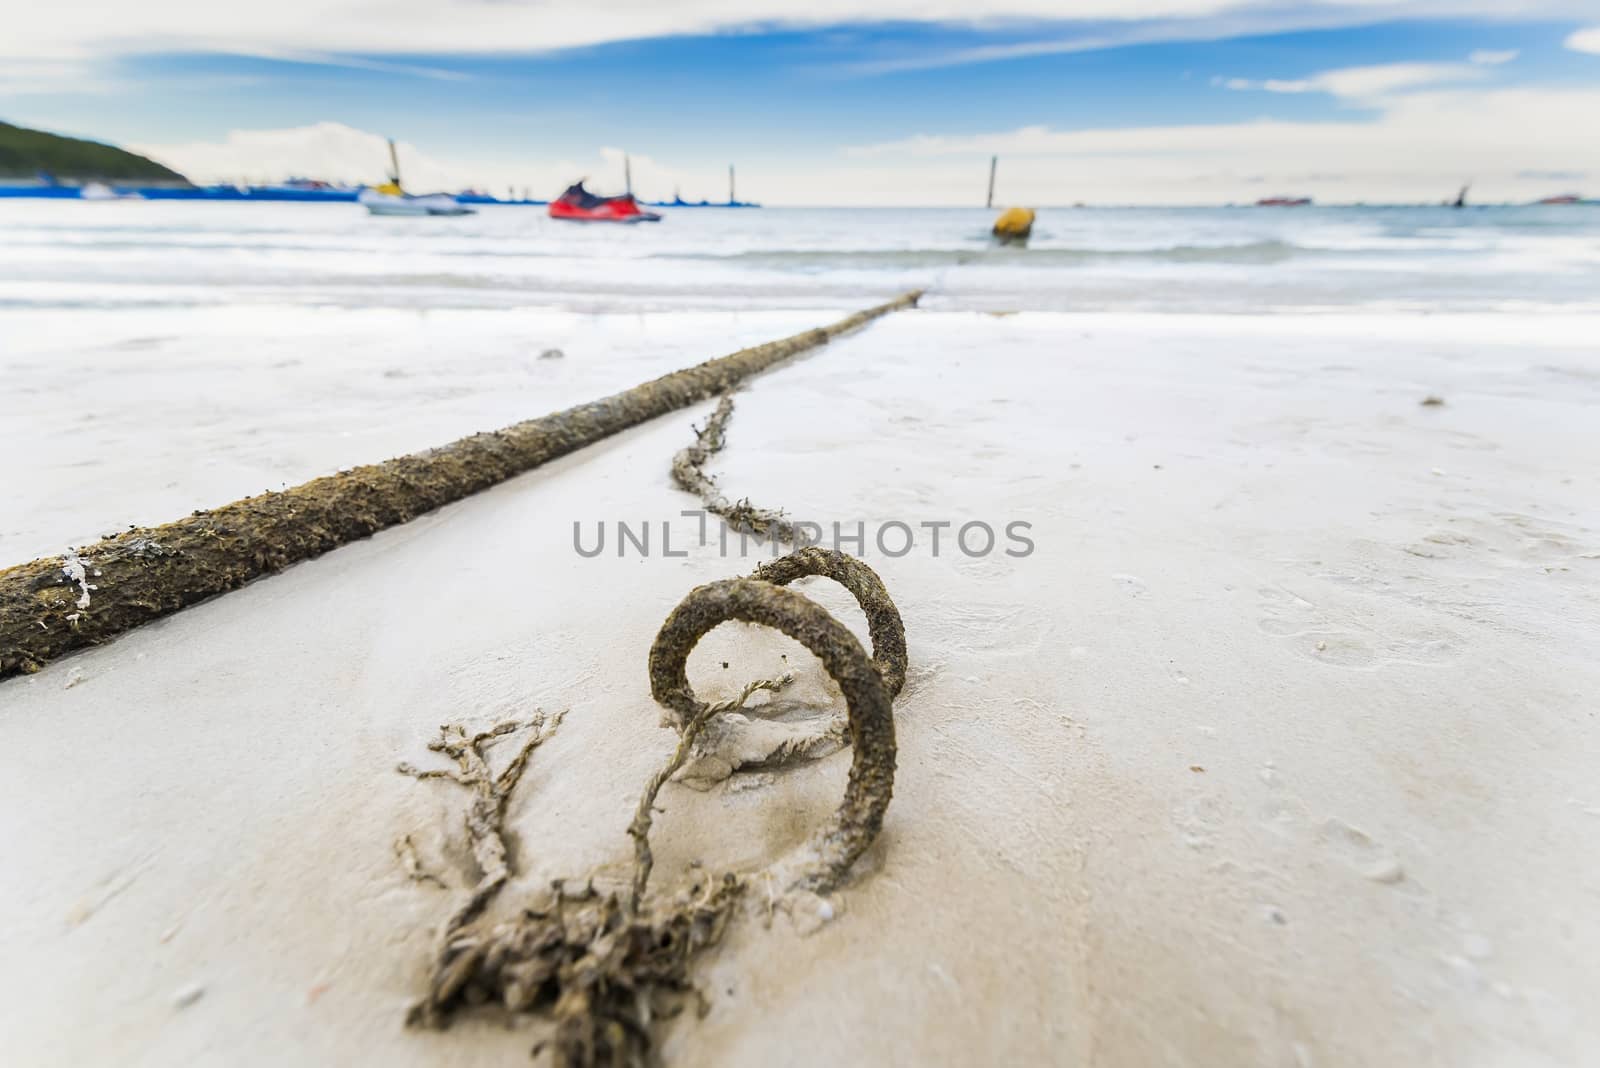 Broken marine rope and sea in background